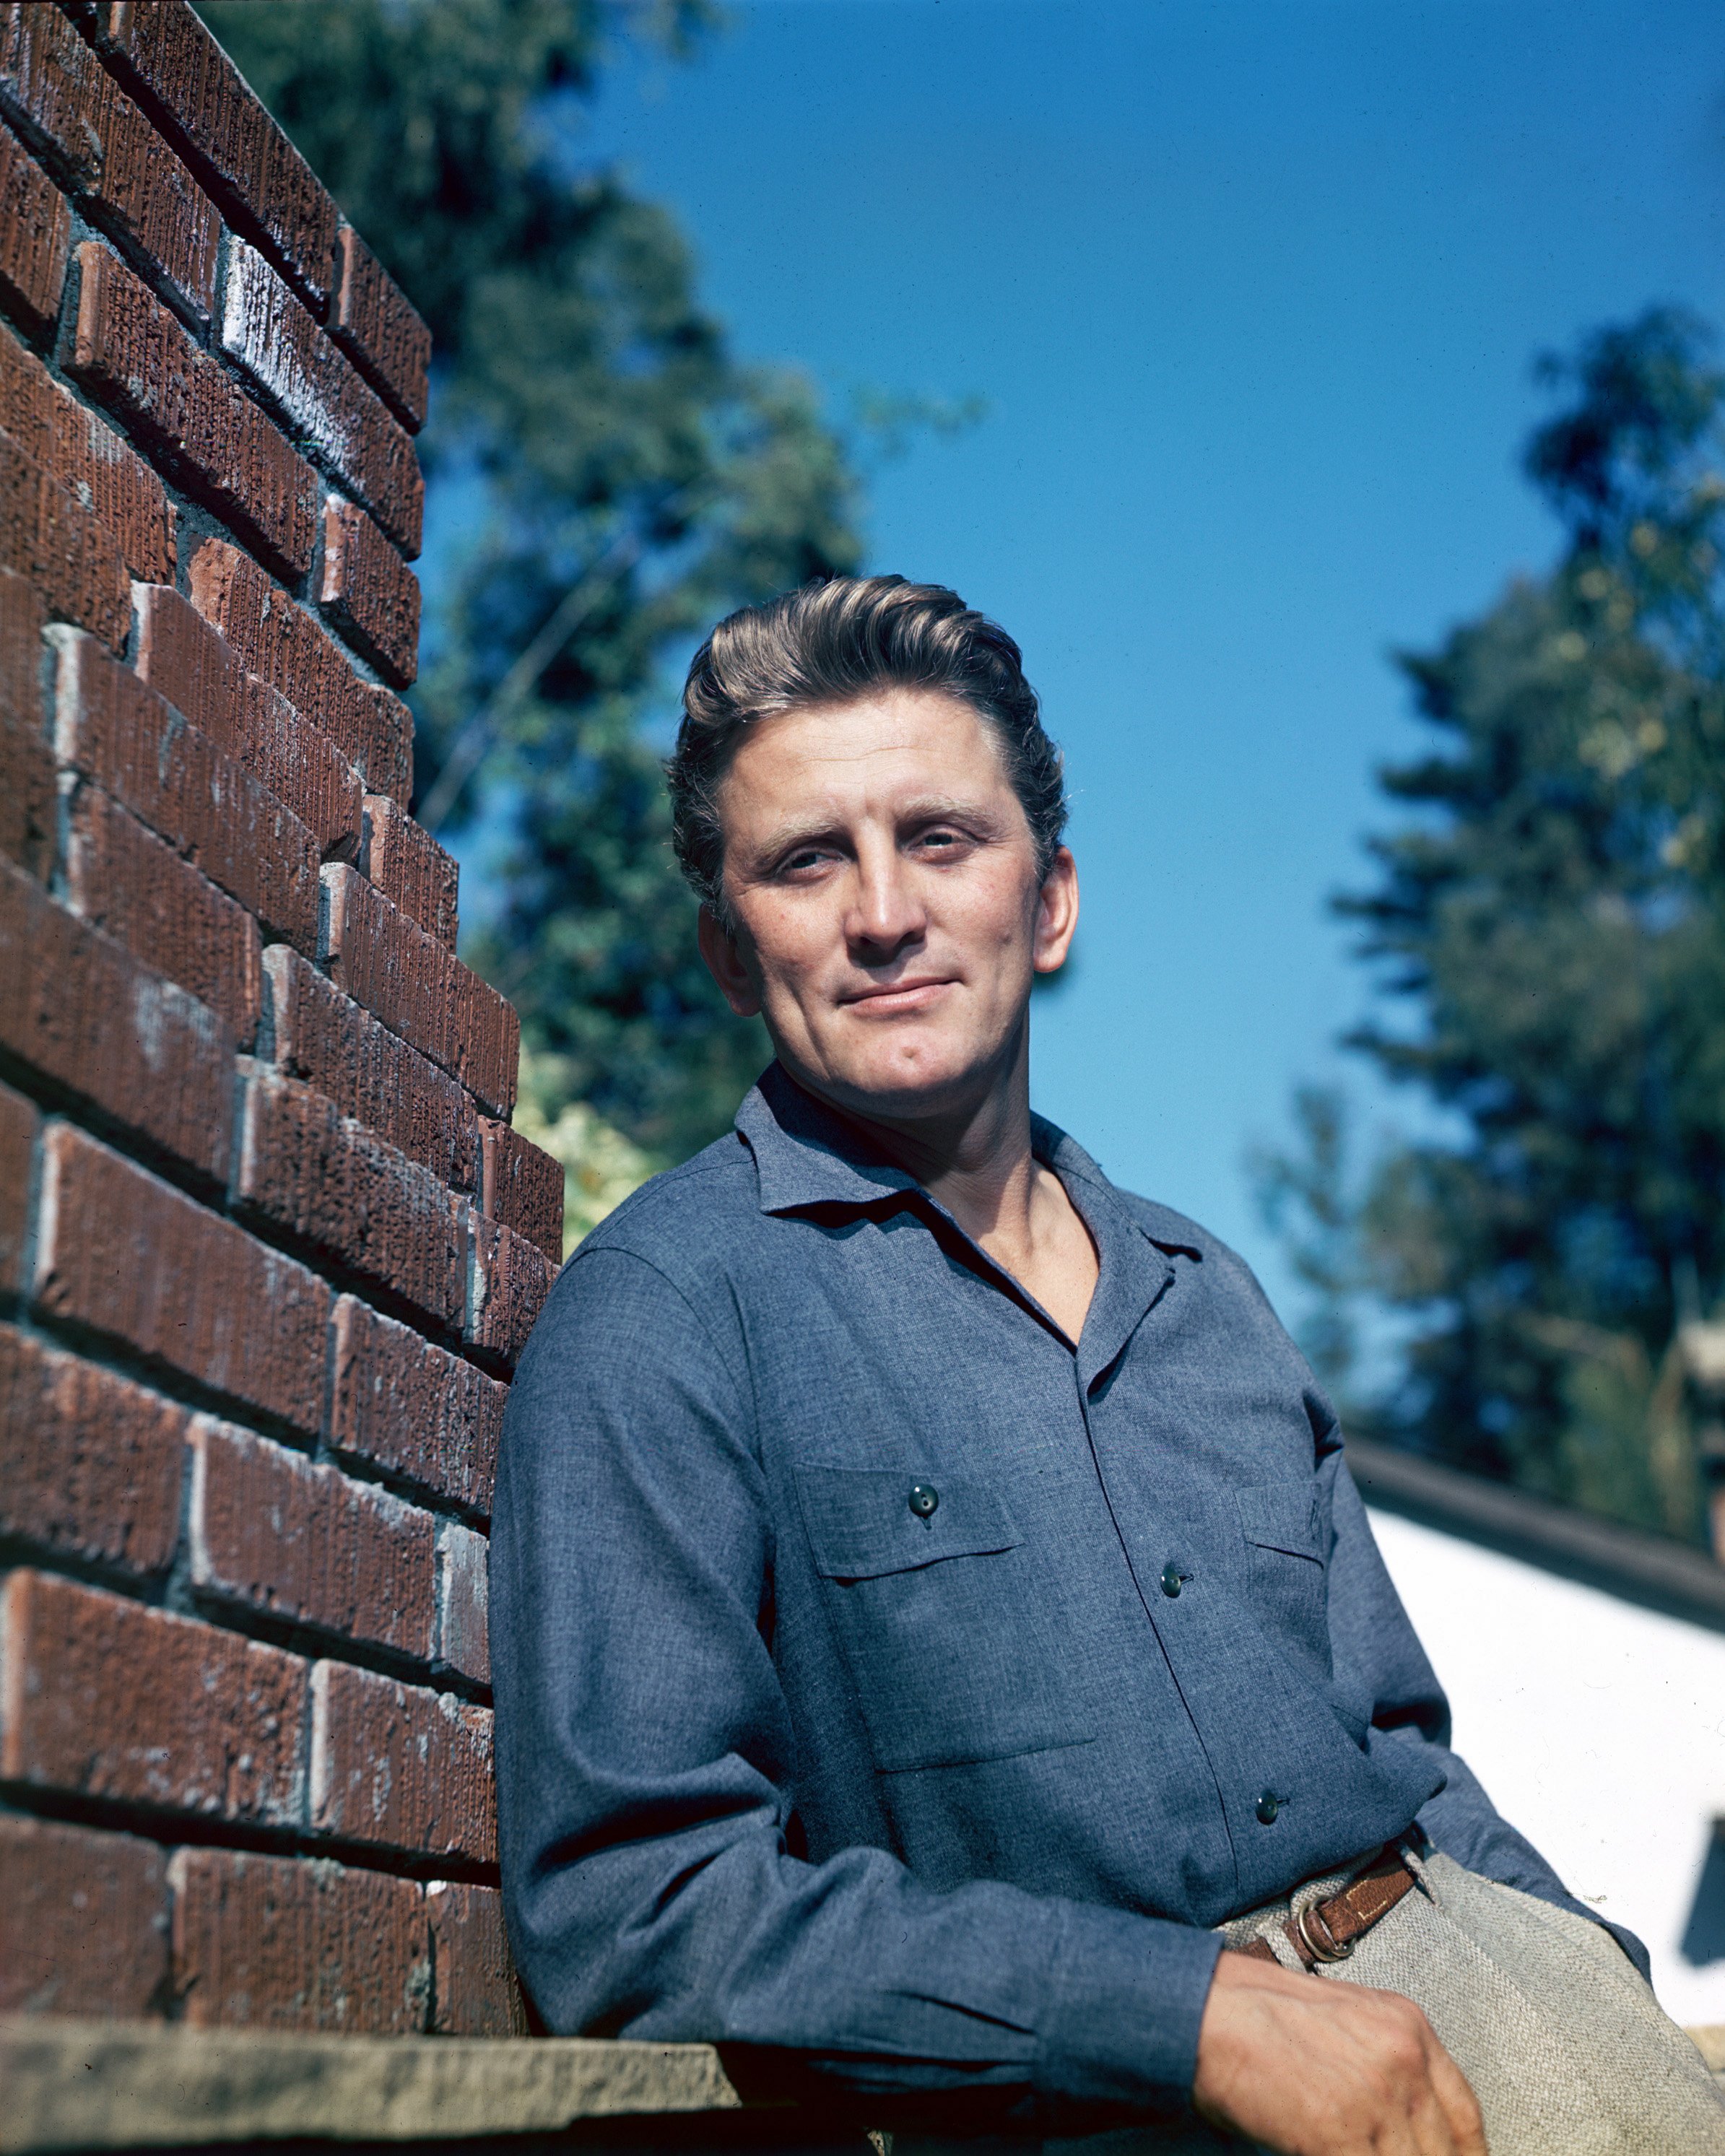 Kirk Douglas photographed leaning against the wall wearing a blue shirt paired with gray trousers in 1955. / Source: Getty Images